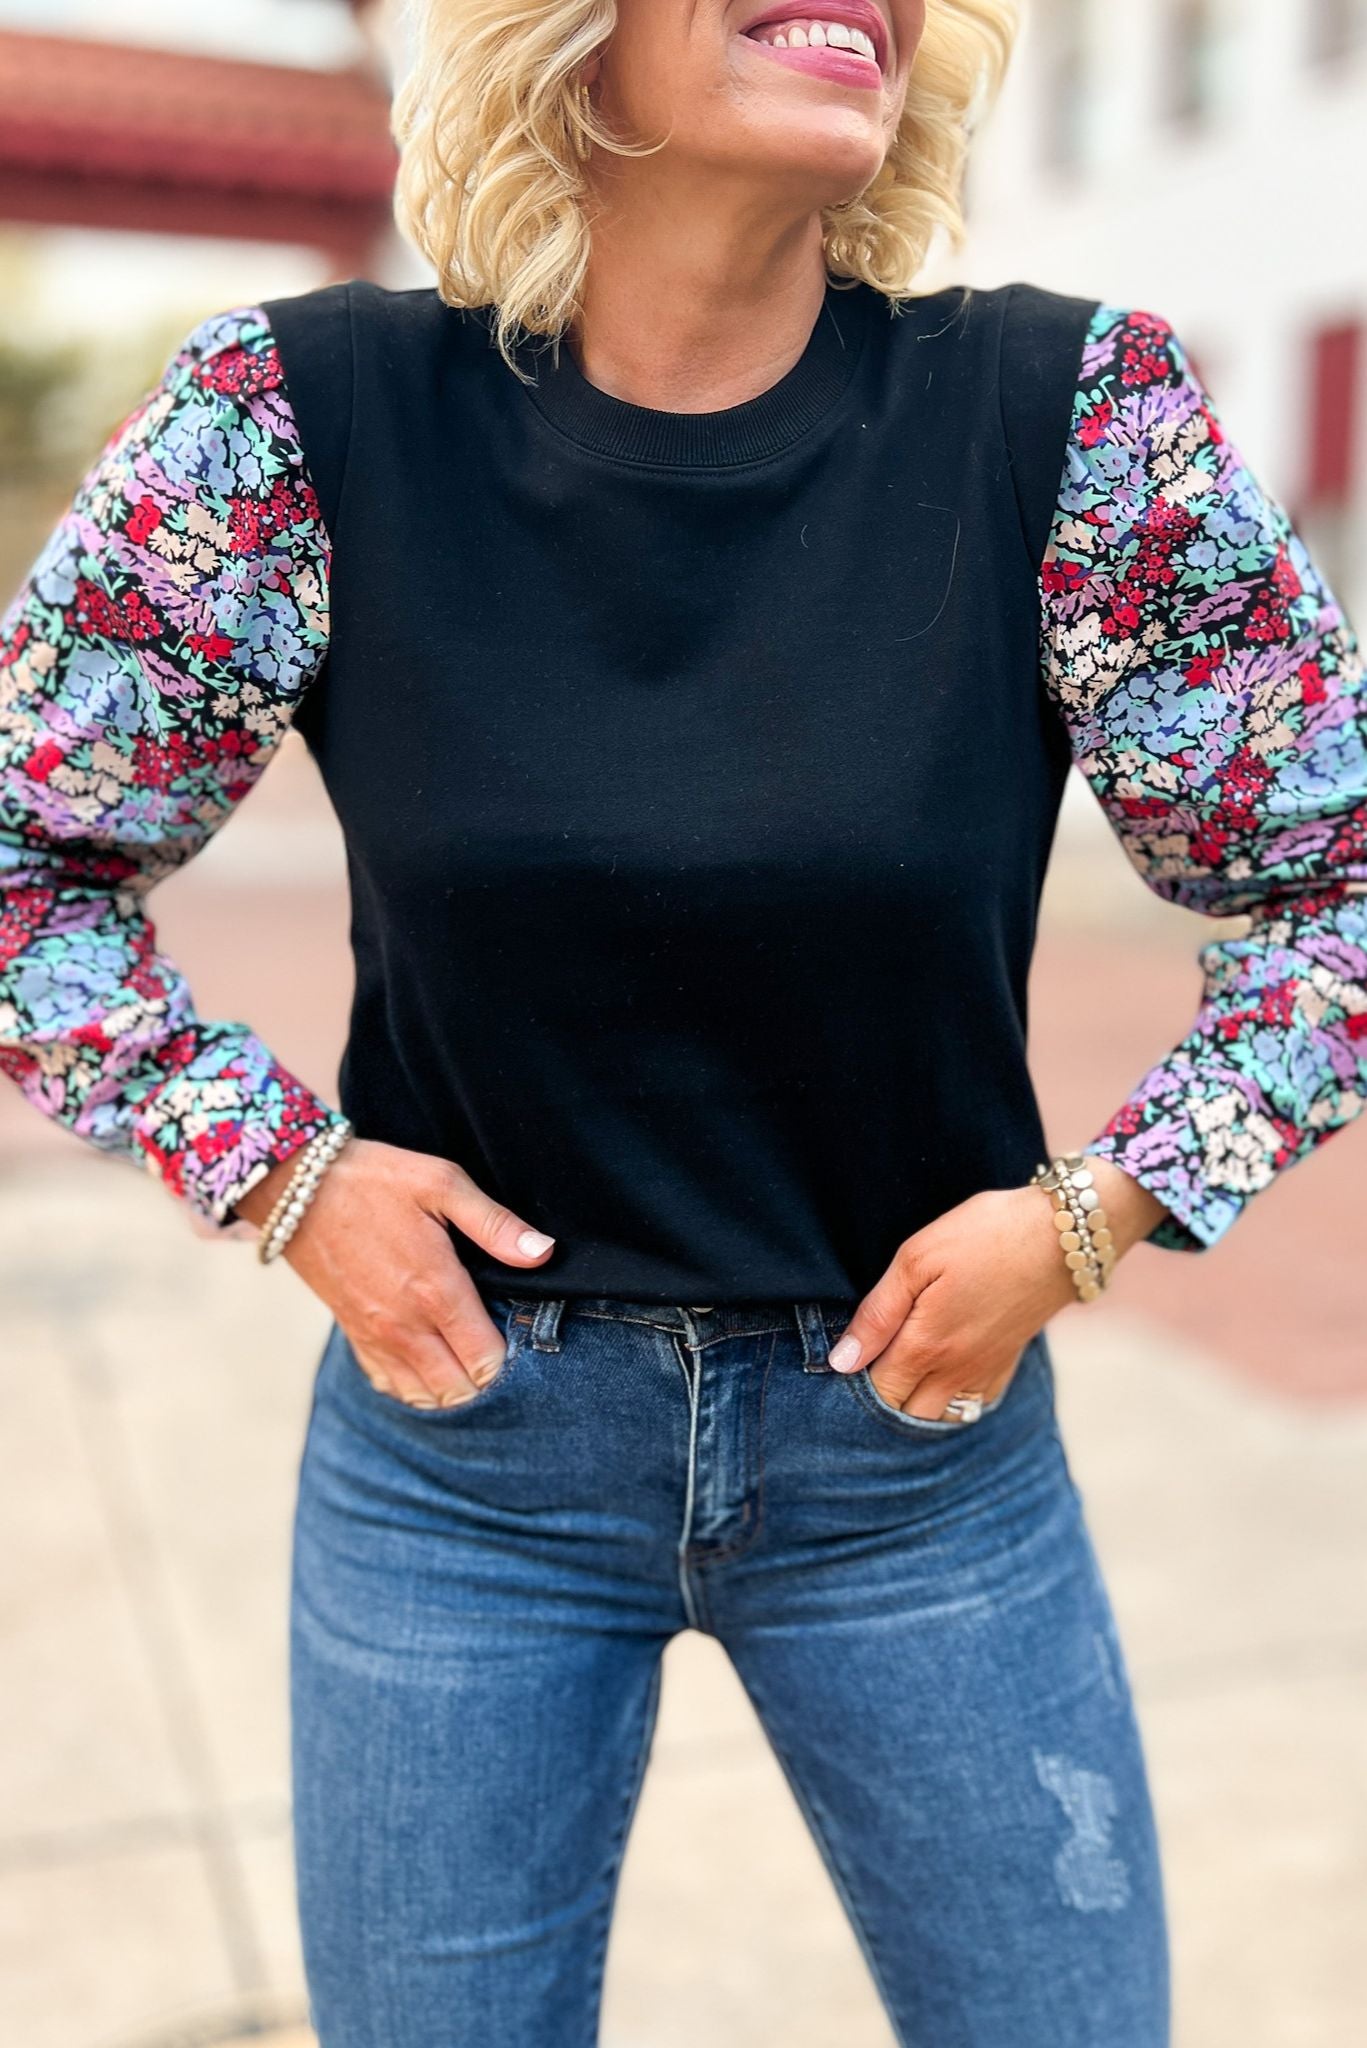 Black Blue Floral Poplin Sleeve Knit Top by Karlie, floral sleeve detail, knit top, lightweight, work wear, mom style, must have, karlie, shop style your senses by mallory fitzsimmons